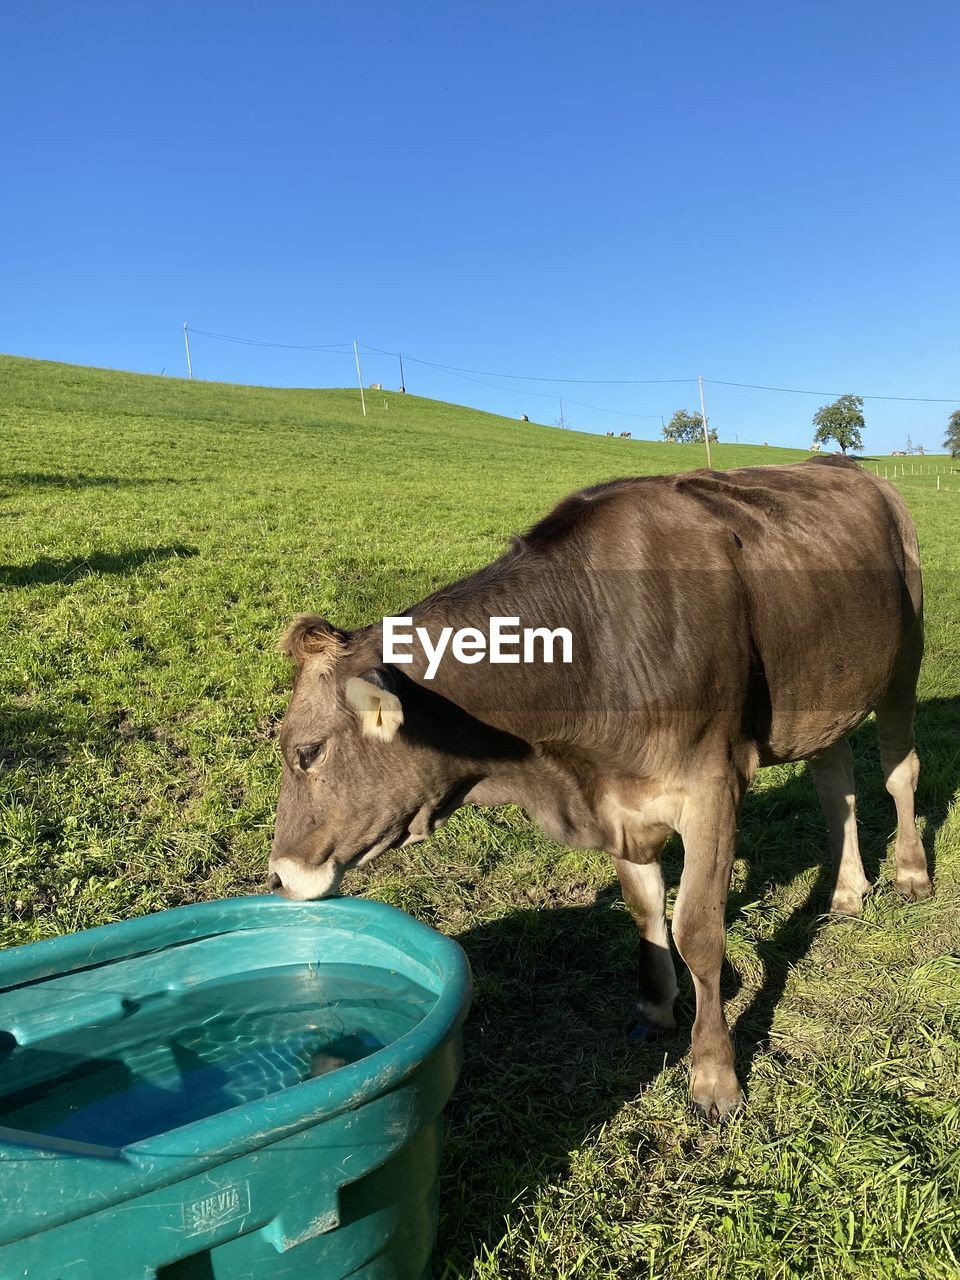 VIEW OF COW DRINKING WATER